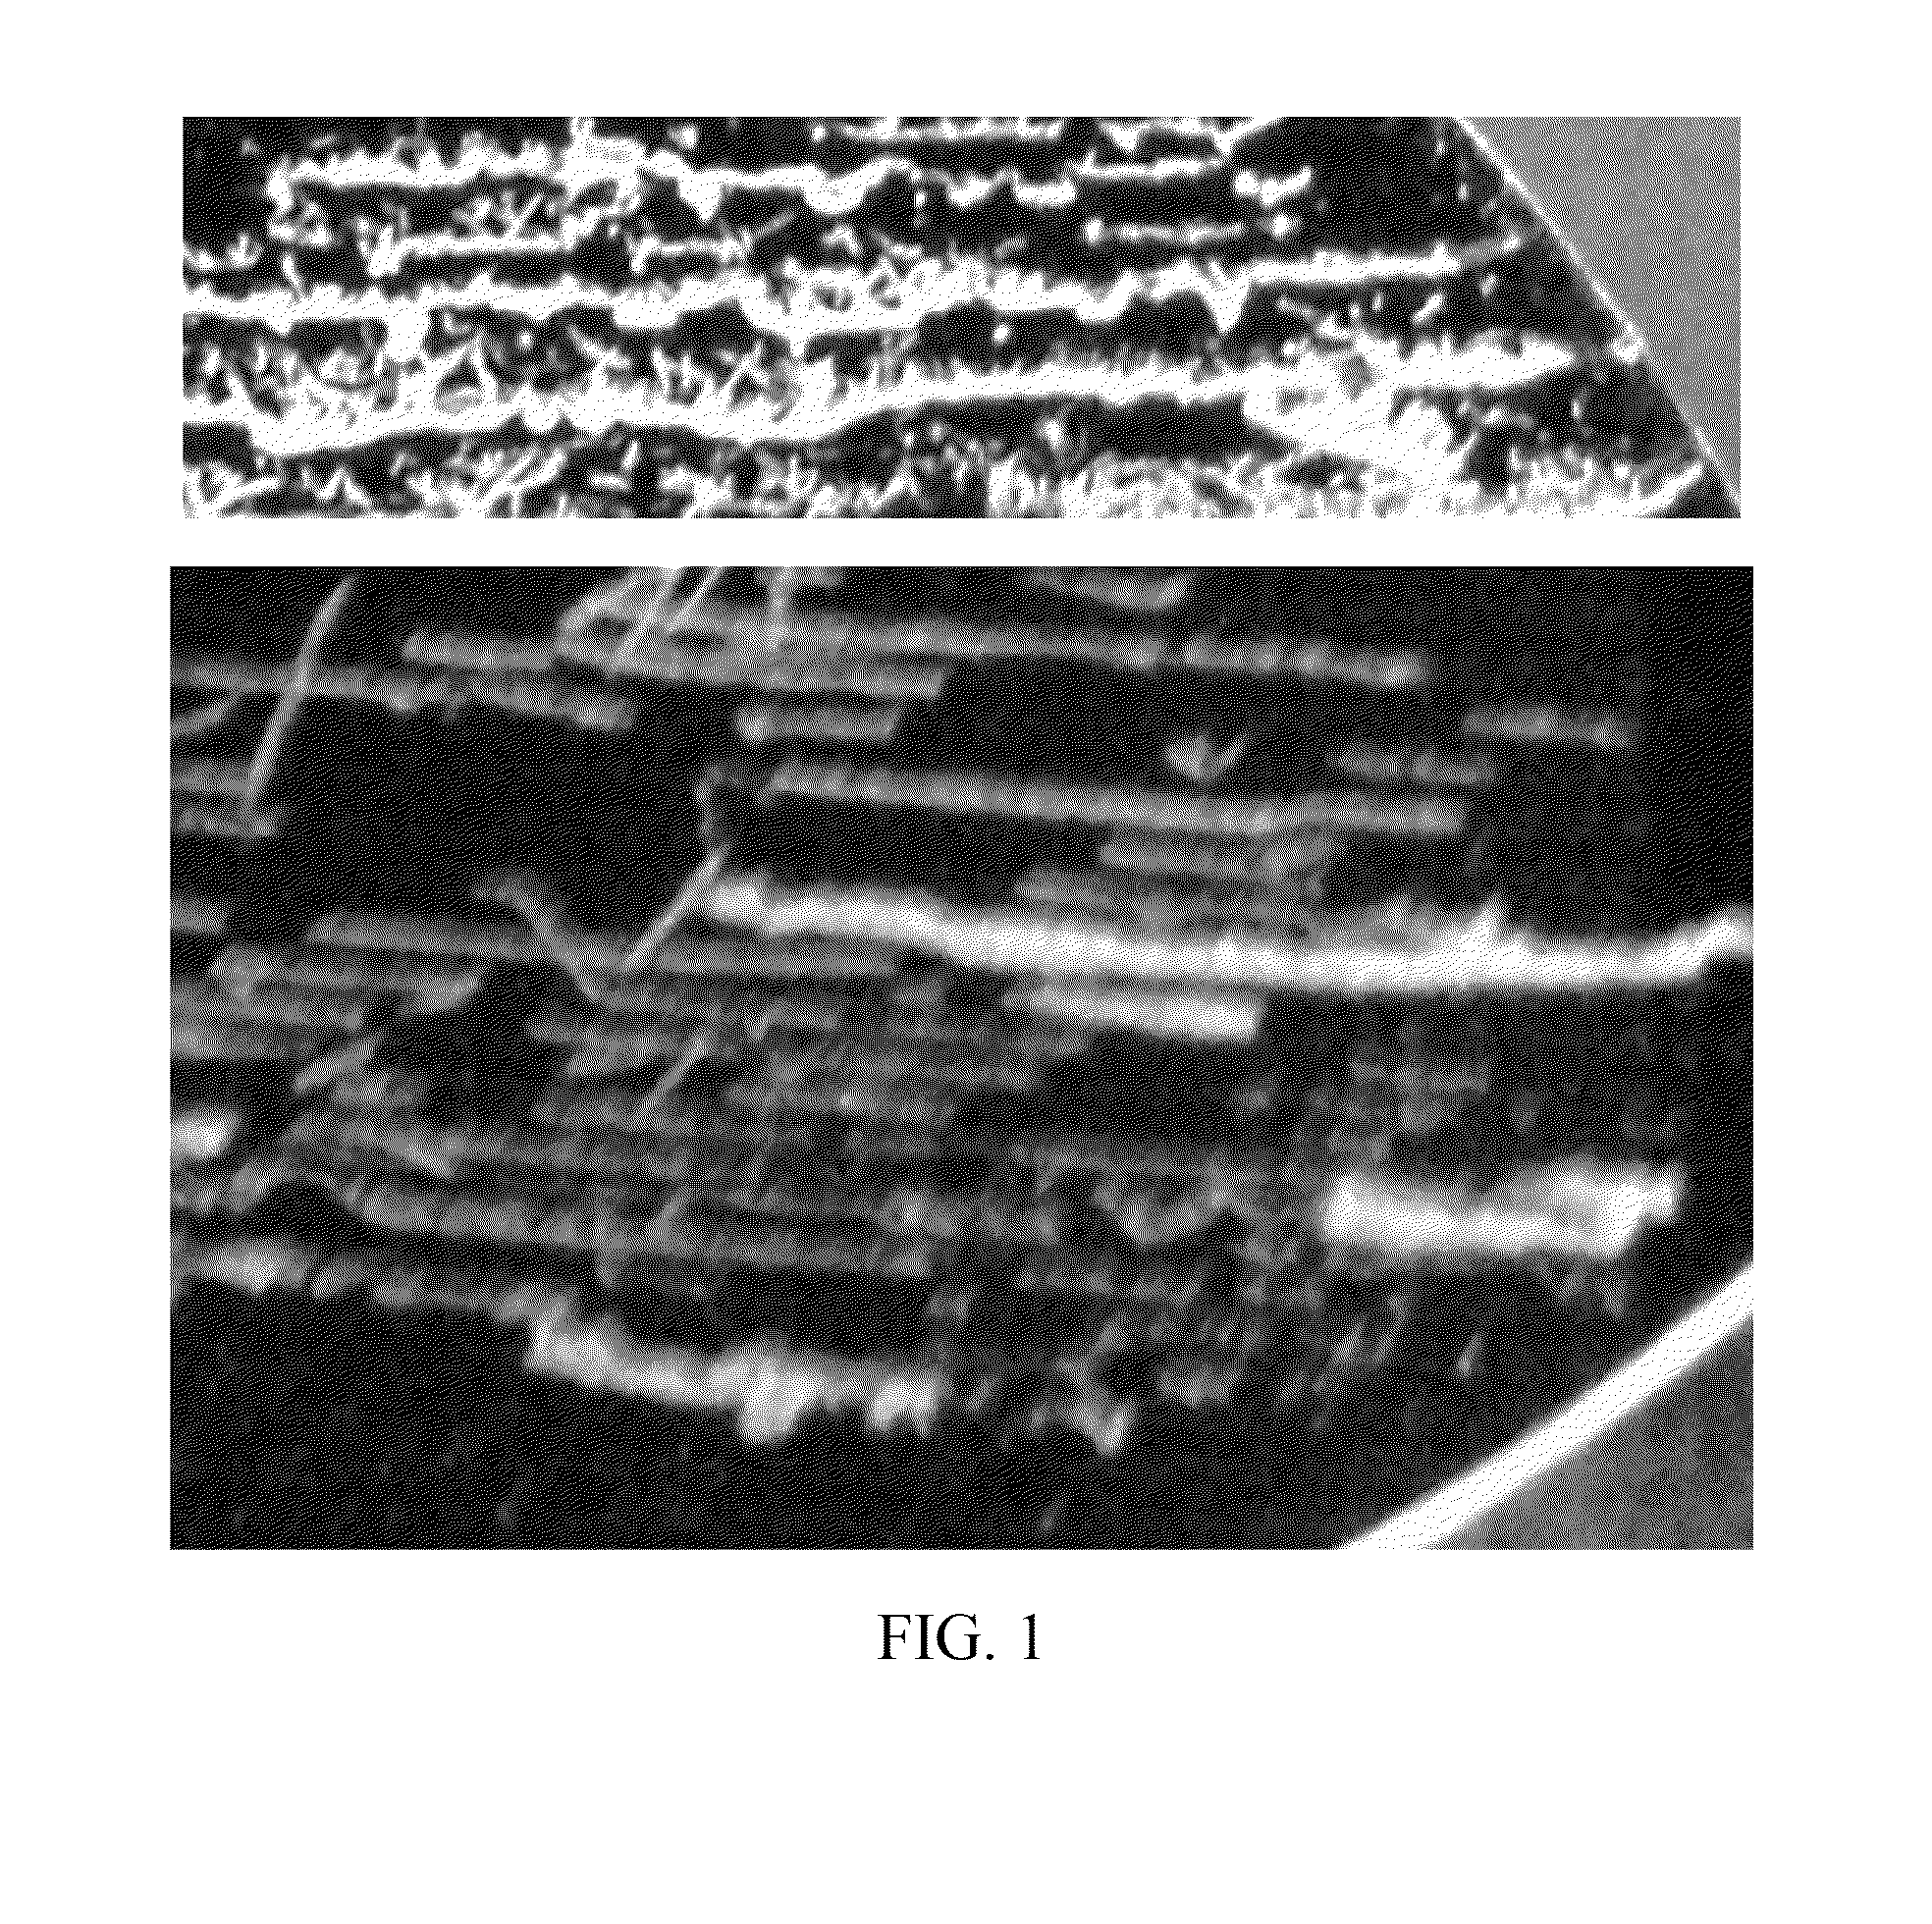 Articles and methods for enhanced boiling heat transfer